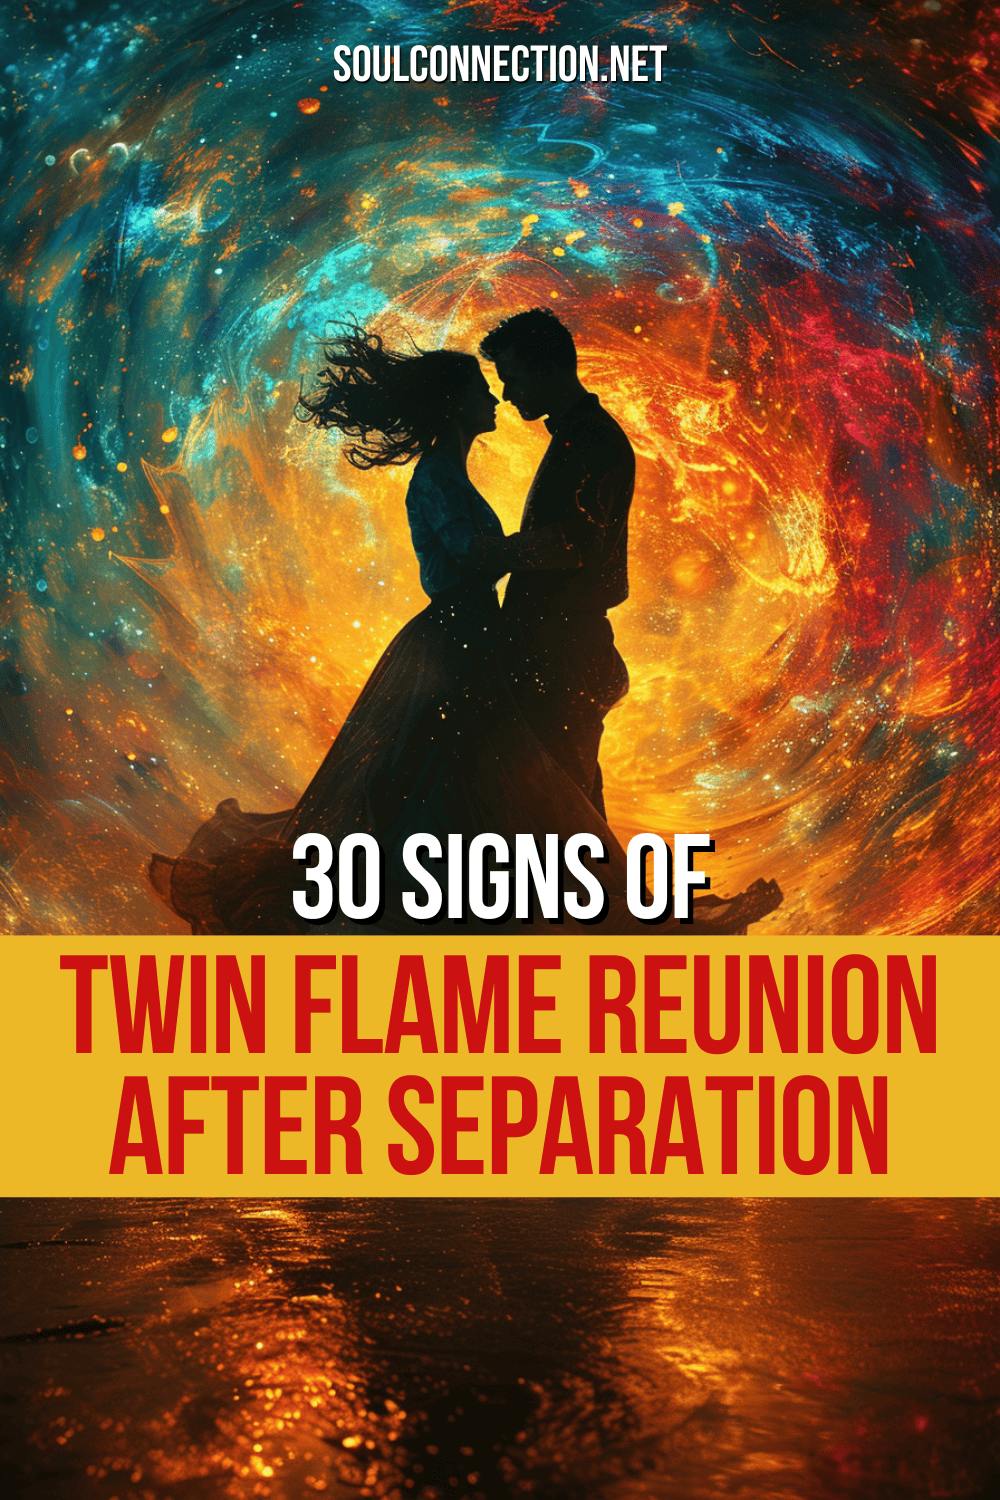 Signs of Twin Flame Reunion: Cosmic Dance of Souls in Vibrant Nebula.